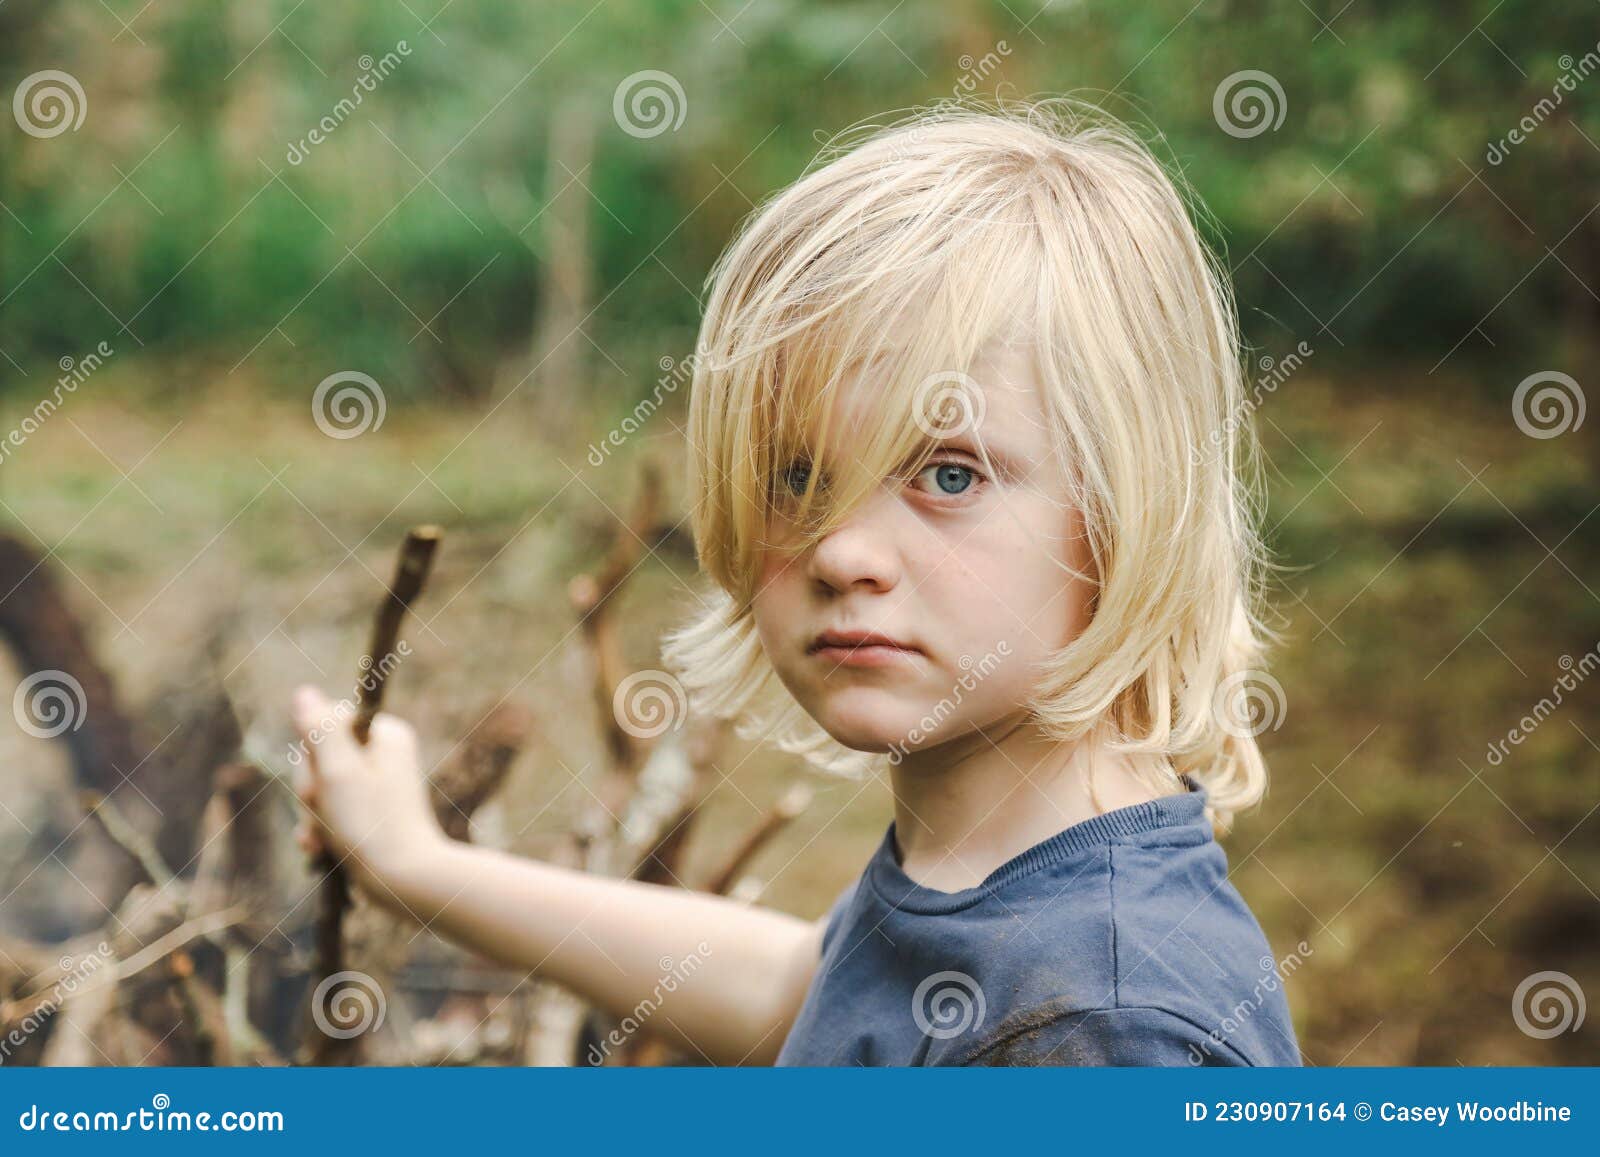 2. Young boy with blonde hair and blue eyes - wide 1